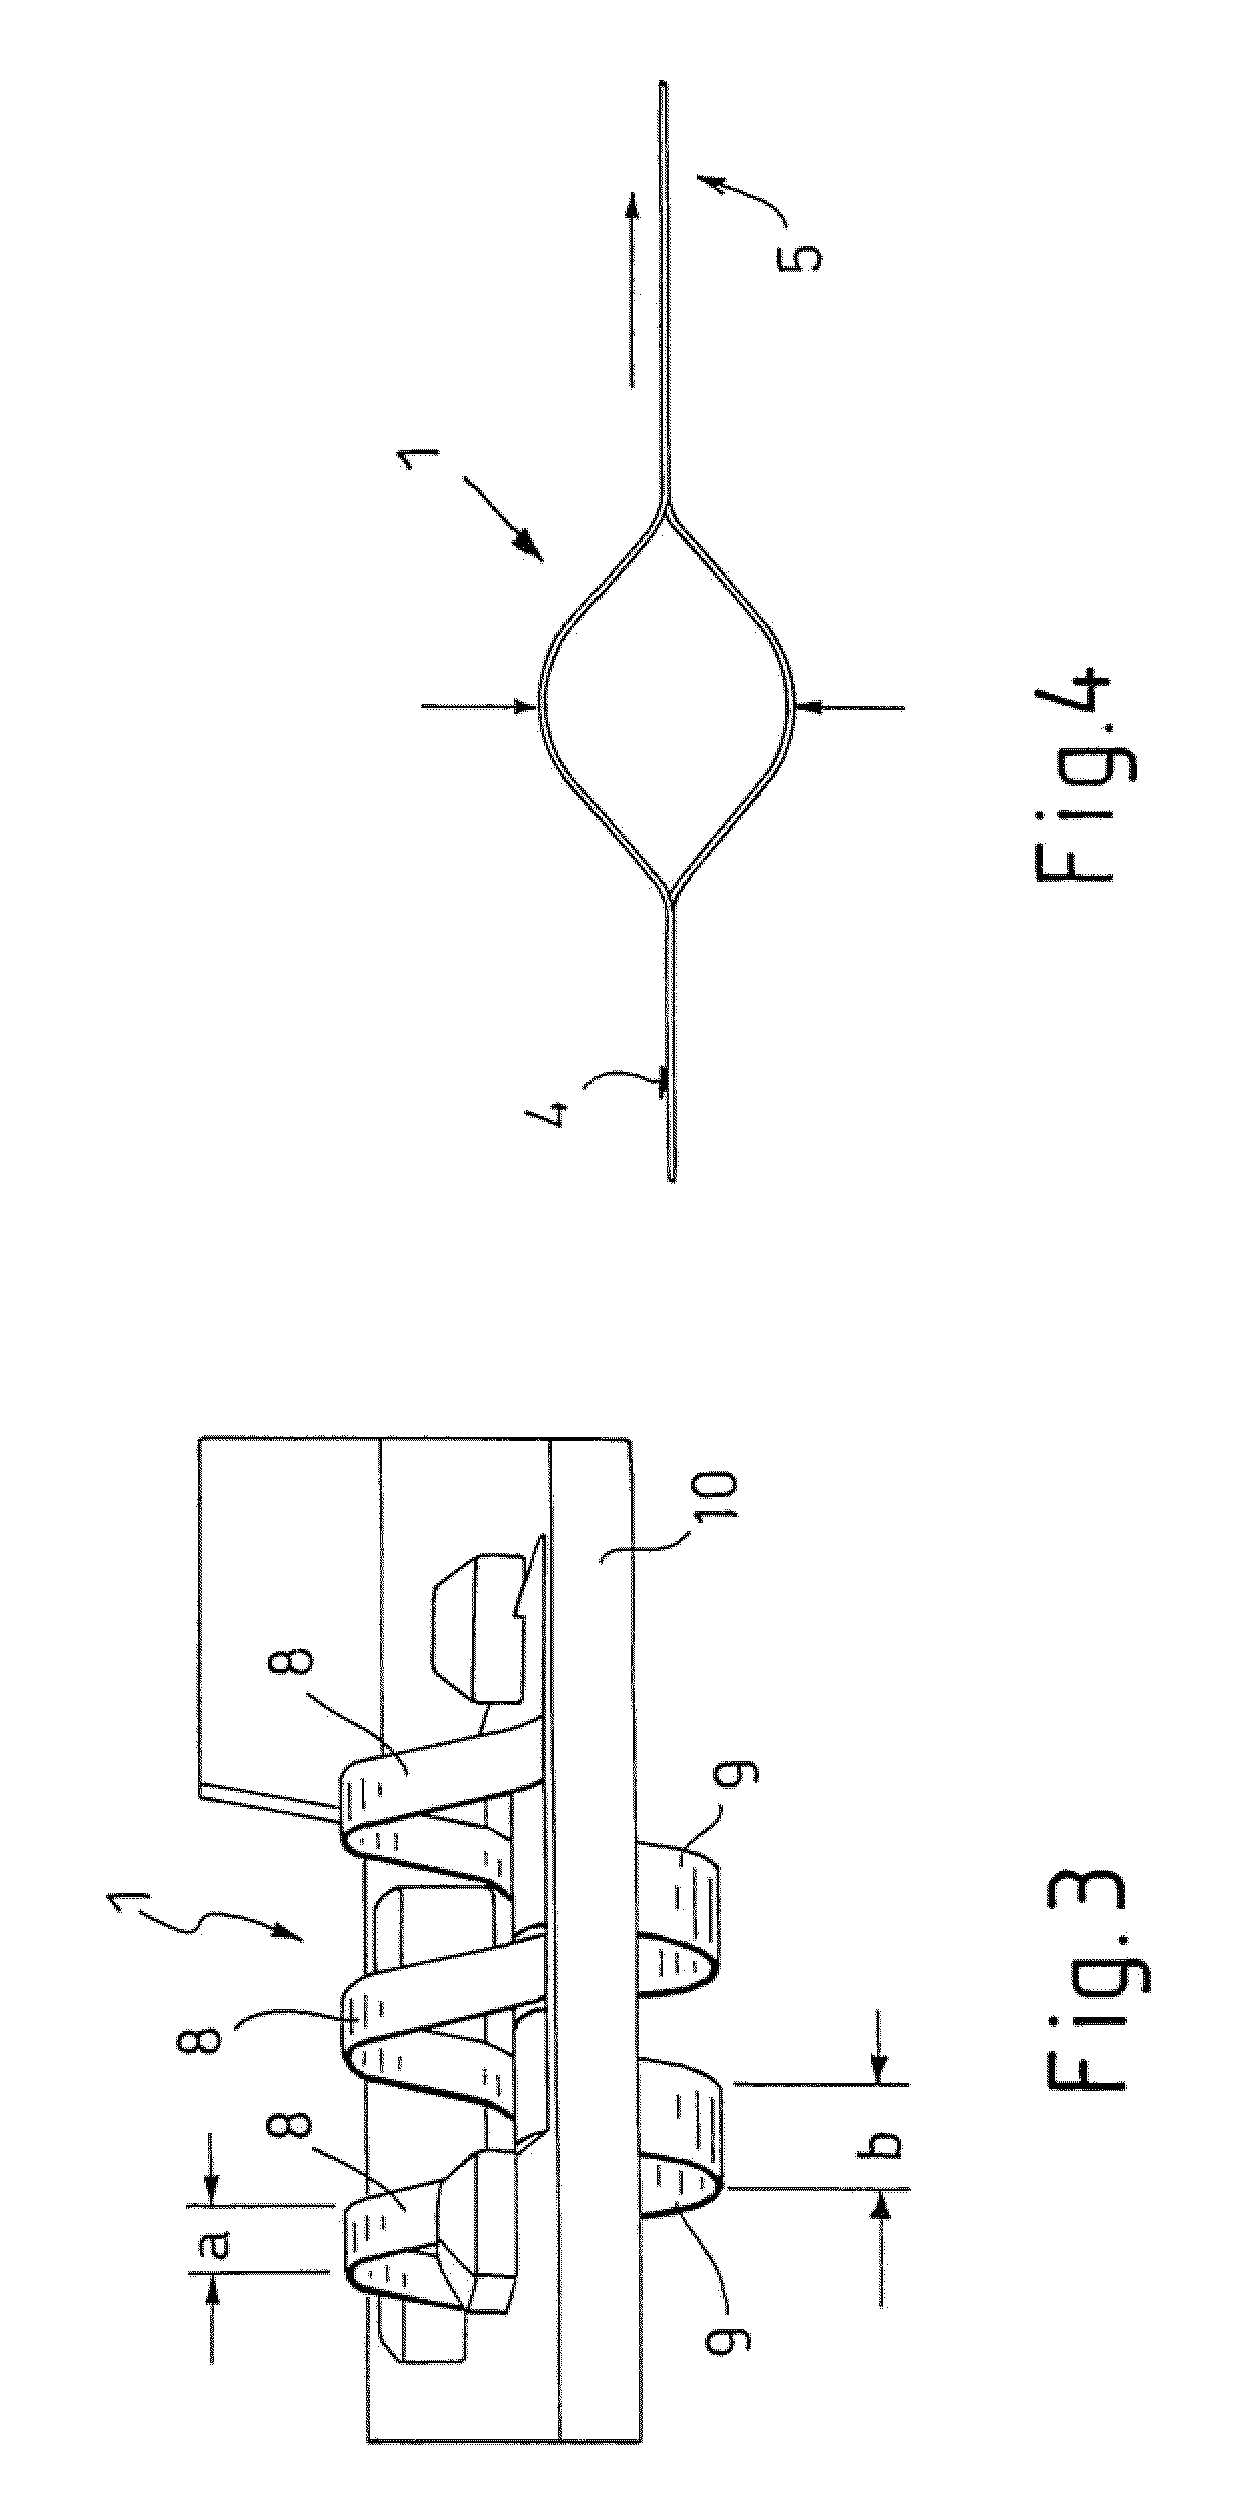 Contact Spring in a Support Frame of an Antenna Amplifier of a Vehicle